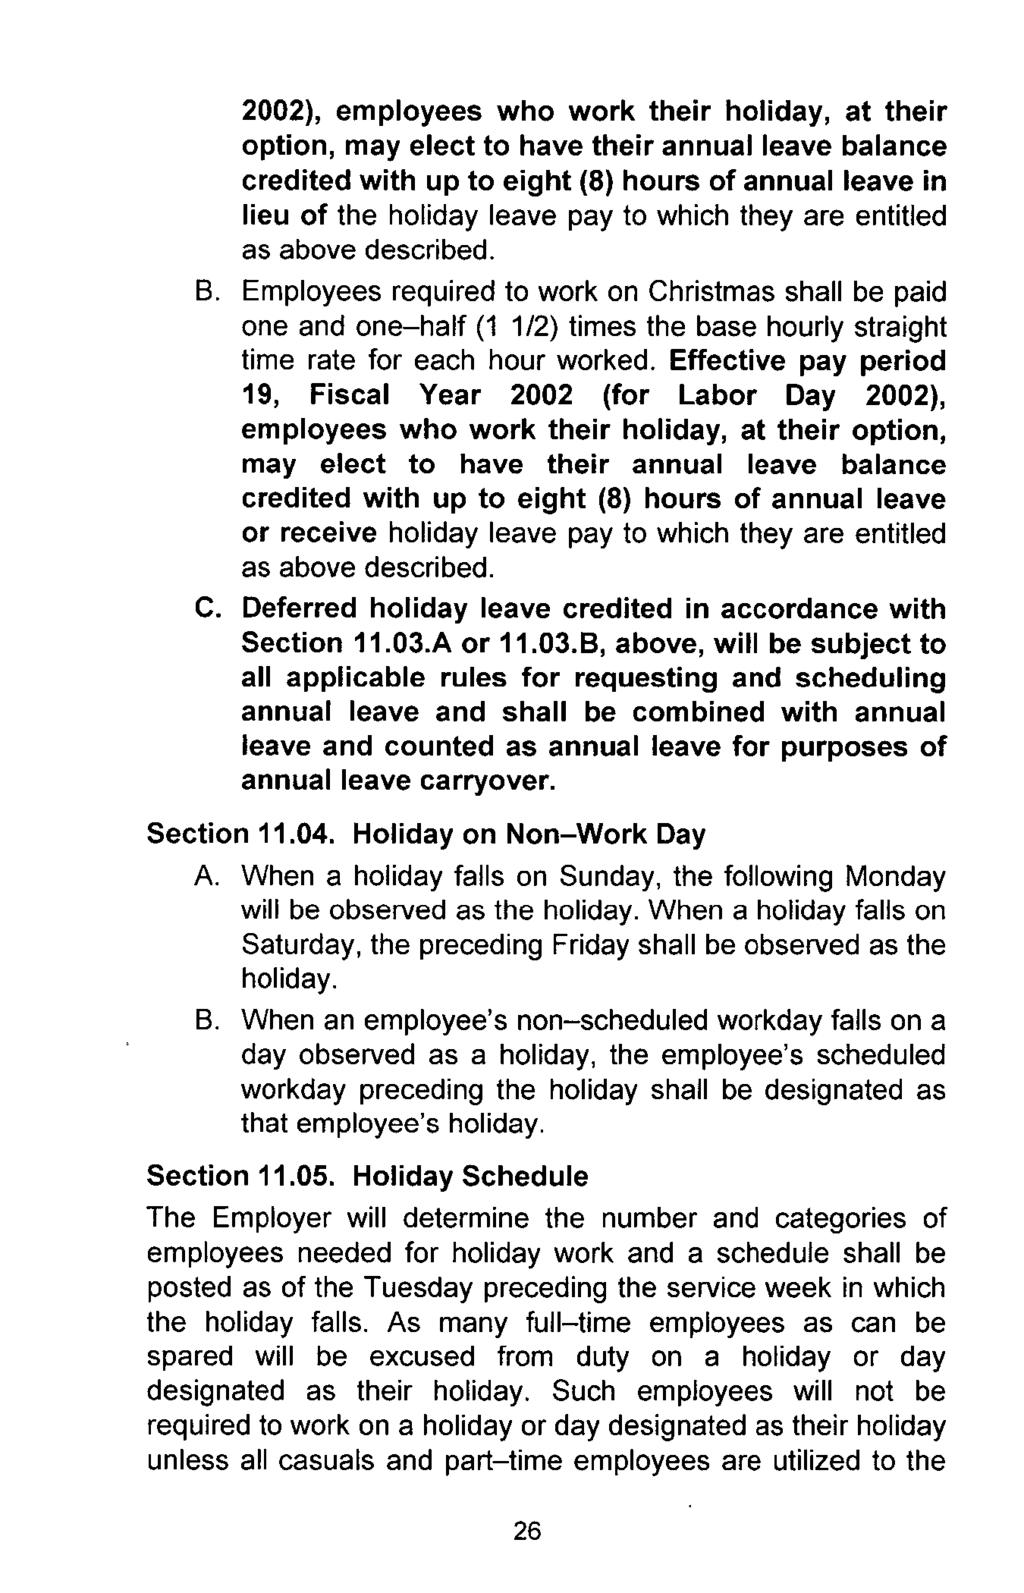 B. 2002), employees who work their holiday, at their option, may elect to have their annual leave balance credited with up to eight (8) hours of annual leave in lieu of the holiday leave pay to which